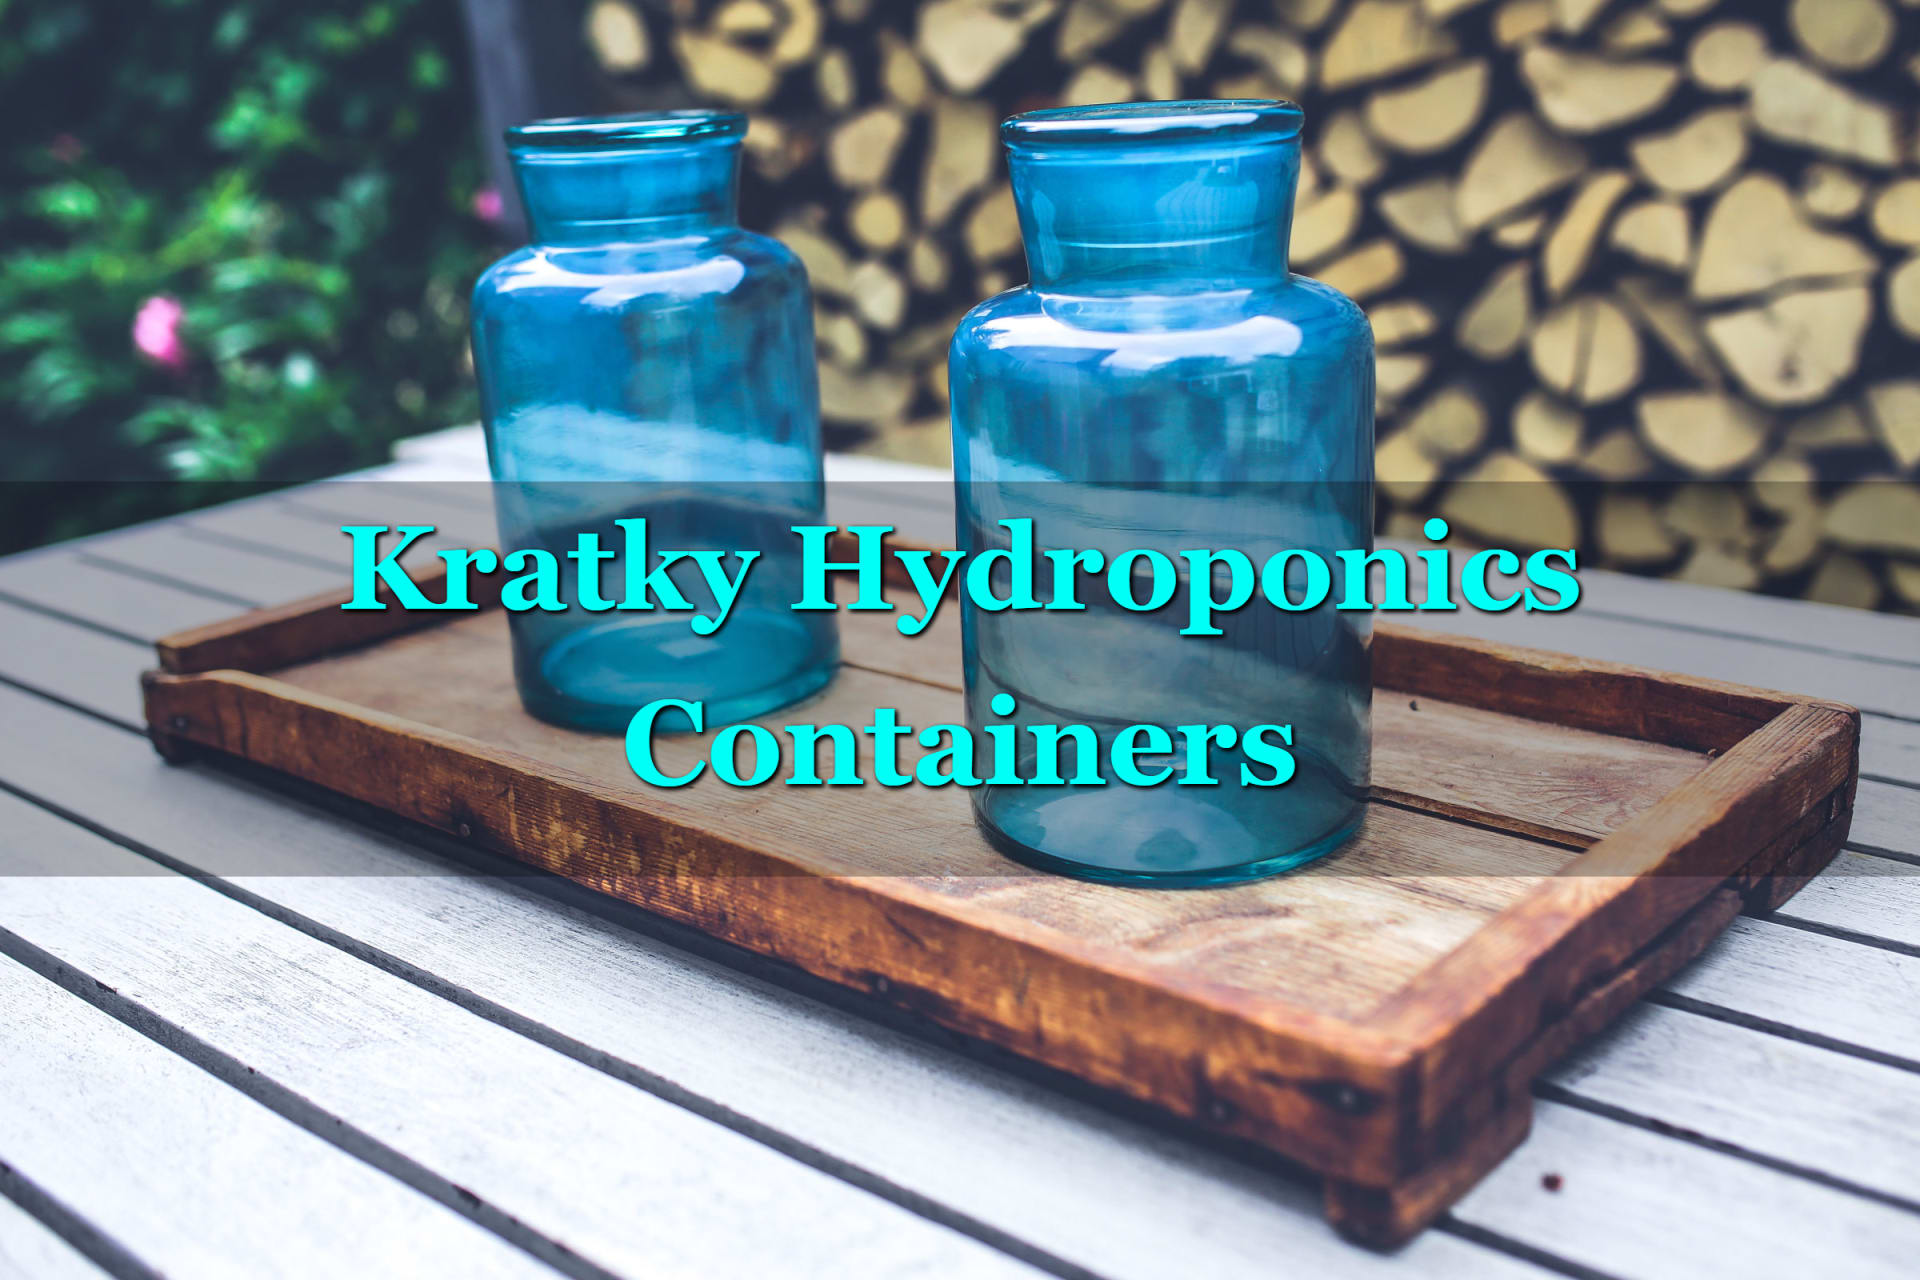 What type of containers can you use in Kratky hydroponics?